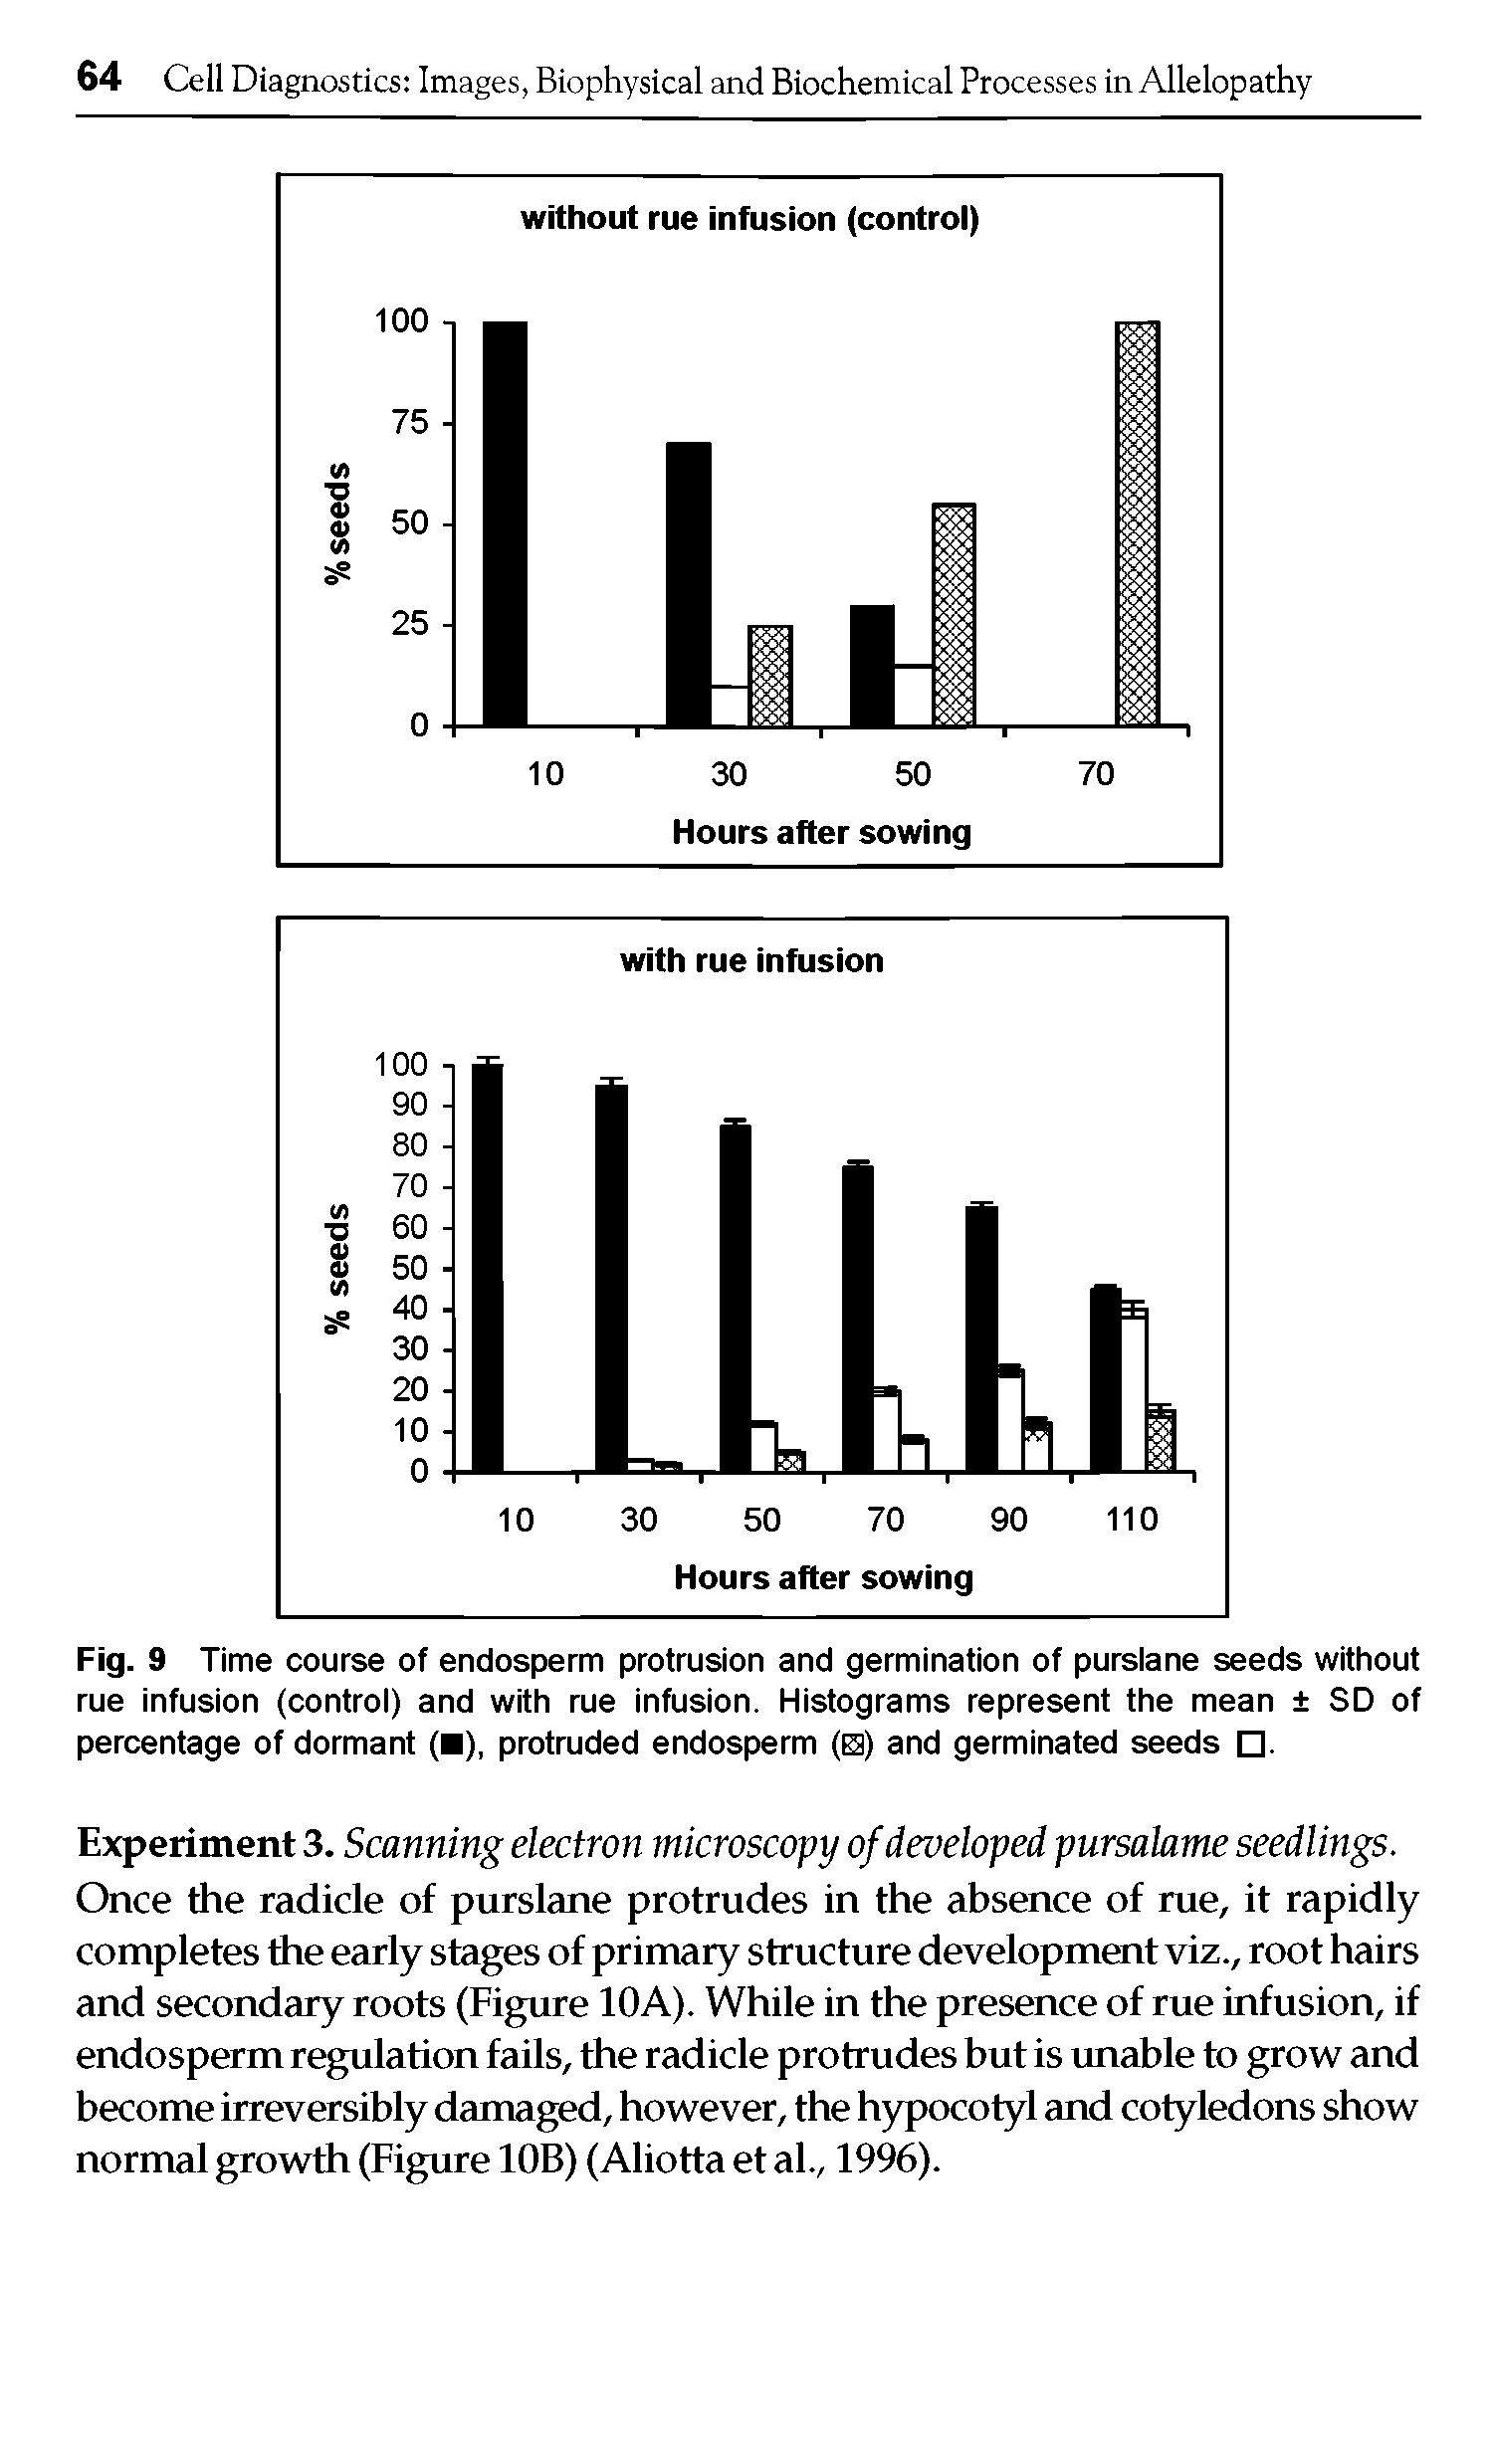 Fig. 9 Time course of endosperm protrusion and germination of purslane seeds without rue infusion (control) and with rue infusion. Histograms represent the mean SD of percentage of dormant ( ), protruded endosperm (0) and germinated seeds .